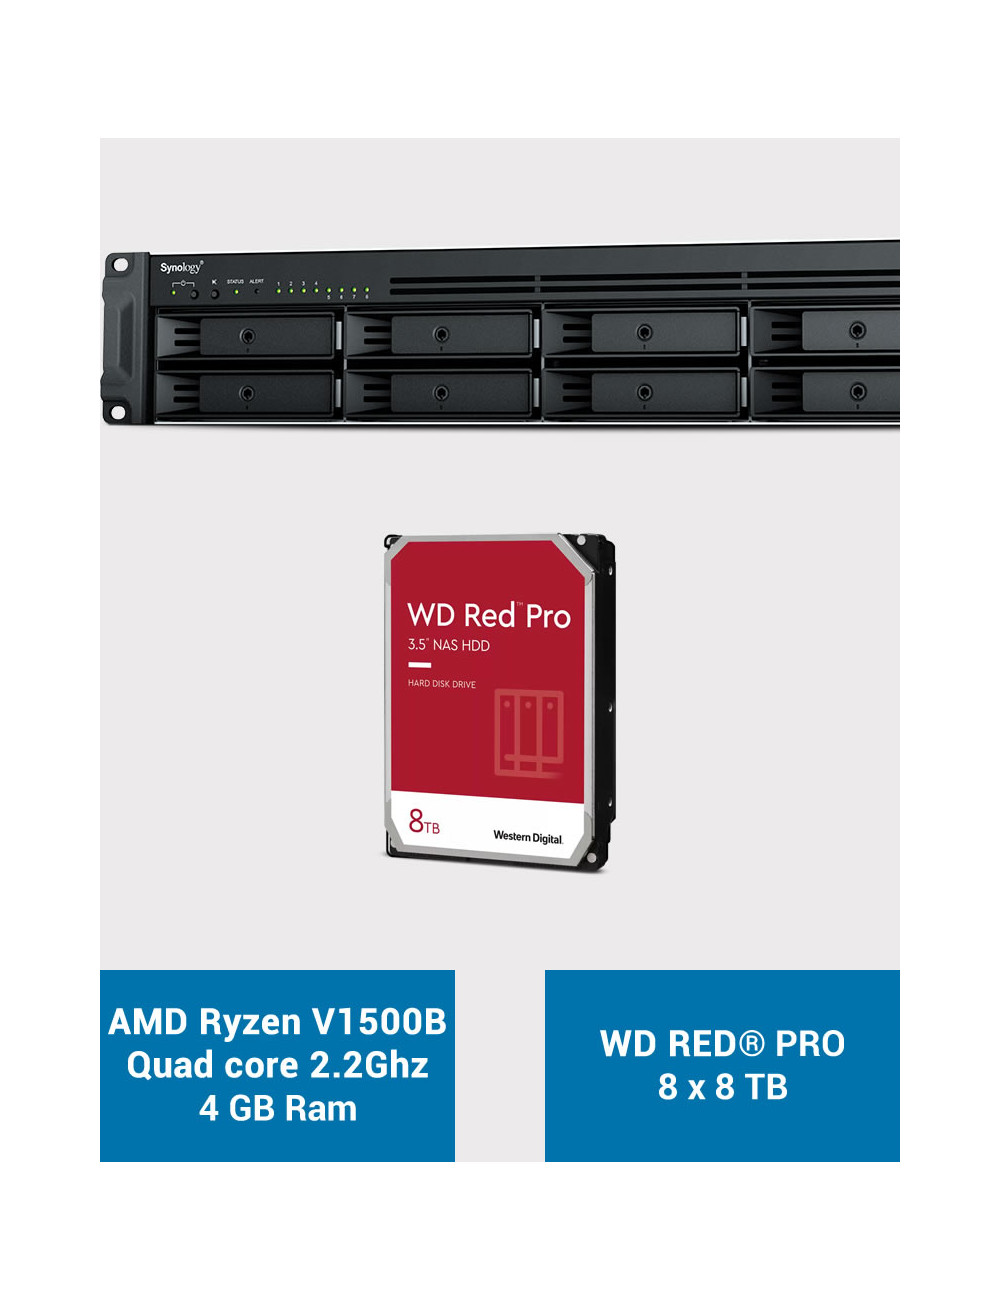 Synology RS1221+ NAS Rack Server WD RED PRO 64TB (8x8TB)